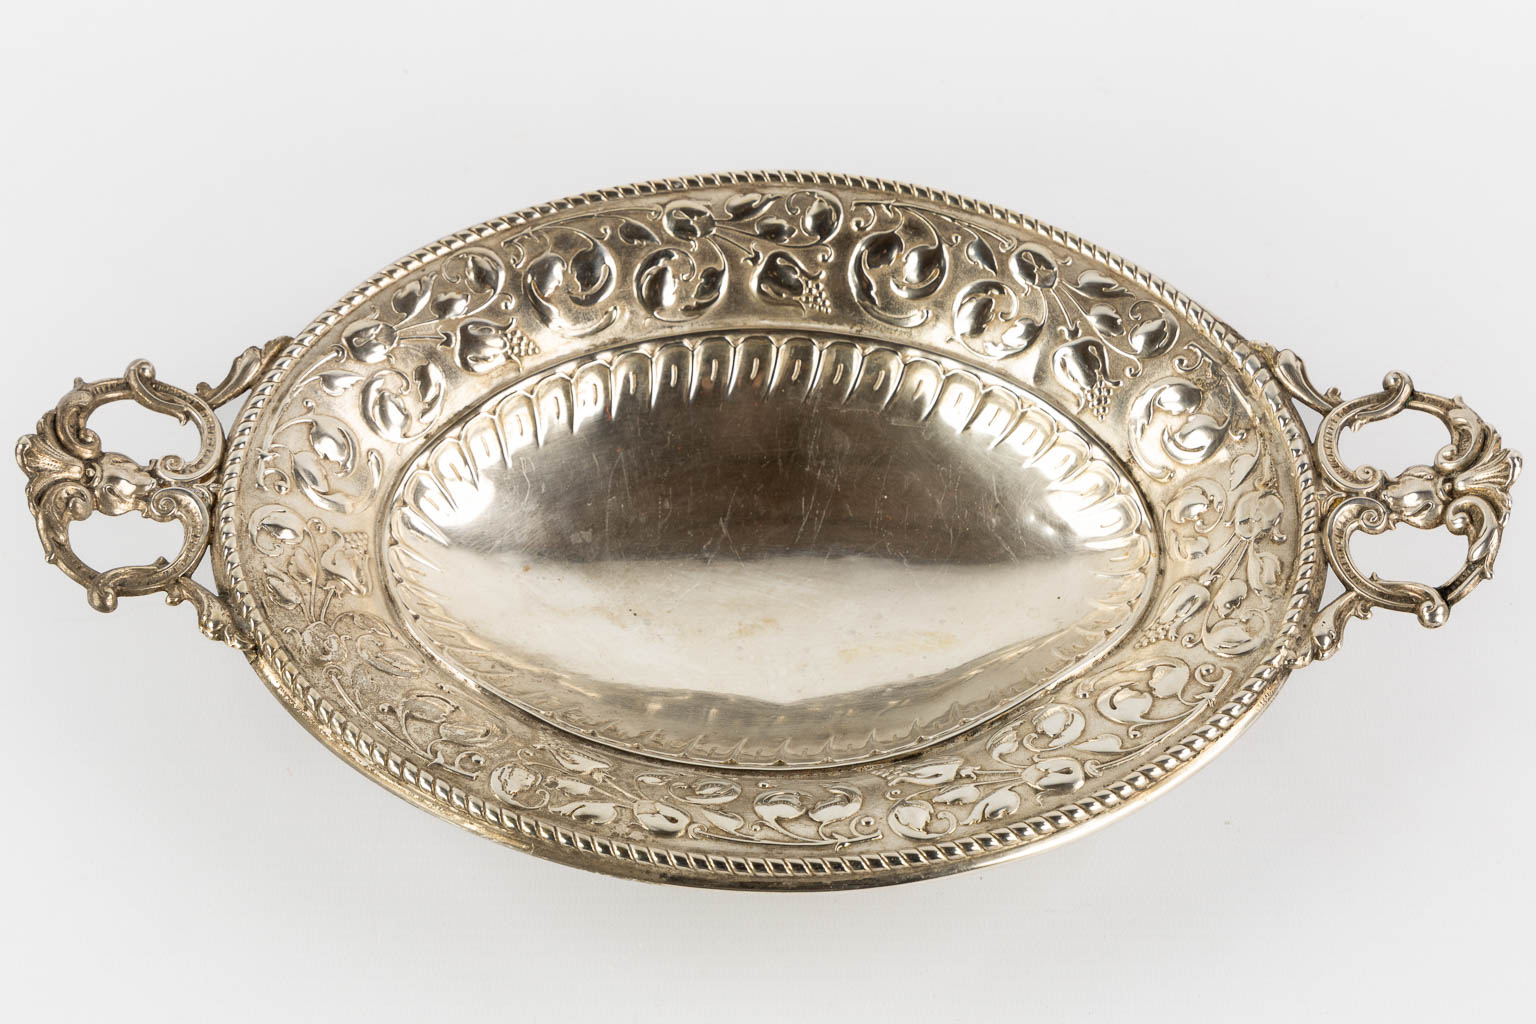 A serving bowl, silver, Germany. 800/1000. 260g. (L:21 x W:36 x H:7 cm) - Image 5 of 9